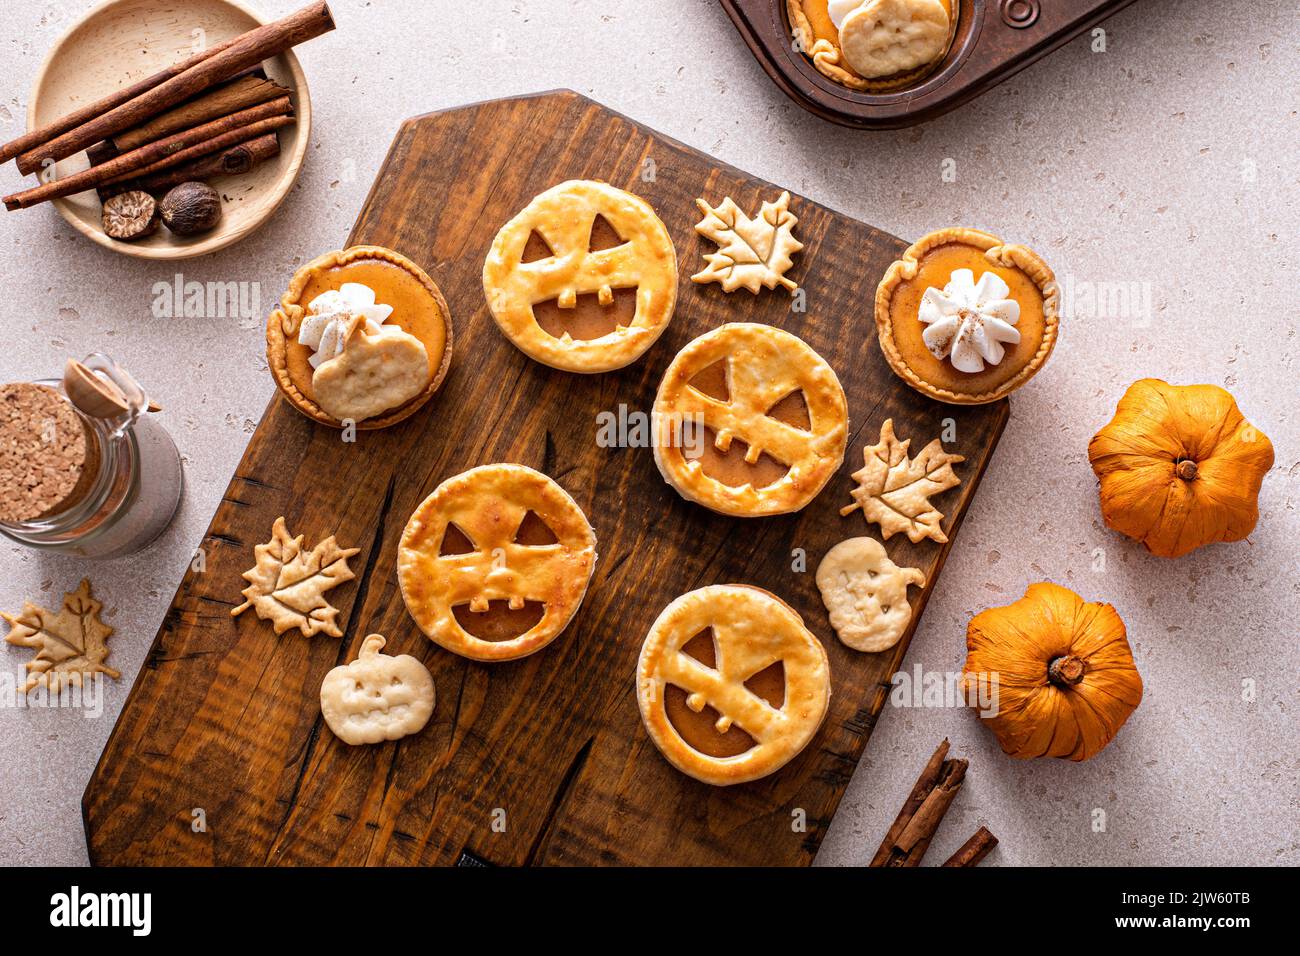 Halloween pumpkin pies with carved pumpkin face on top Stock Photo